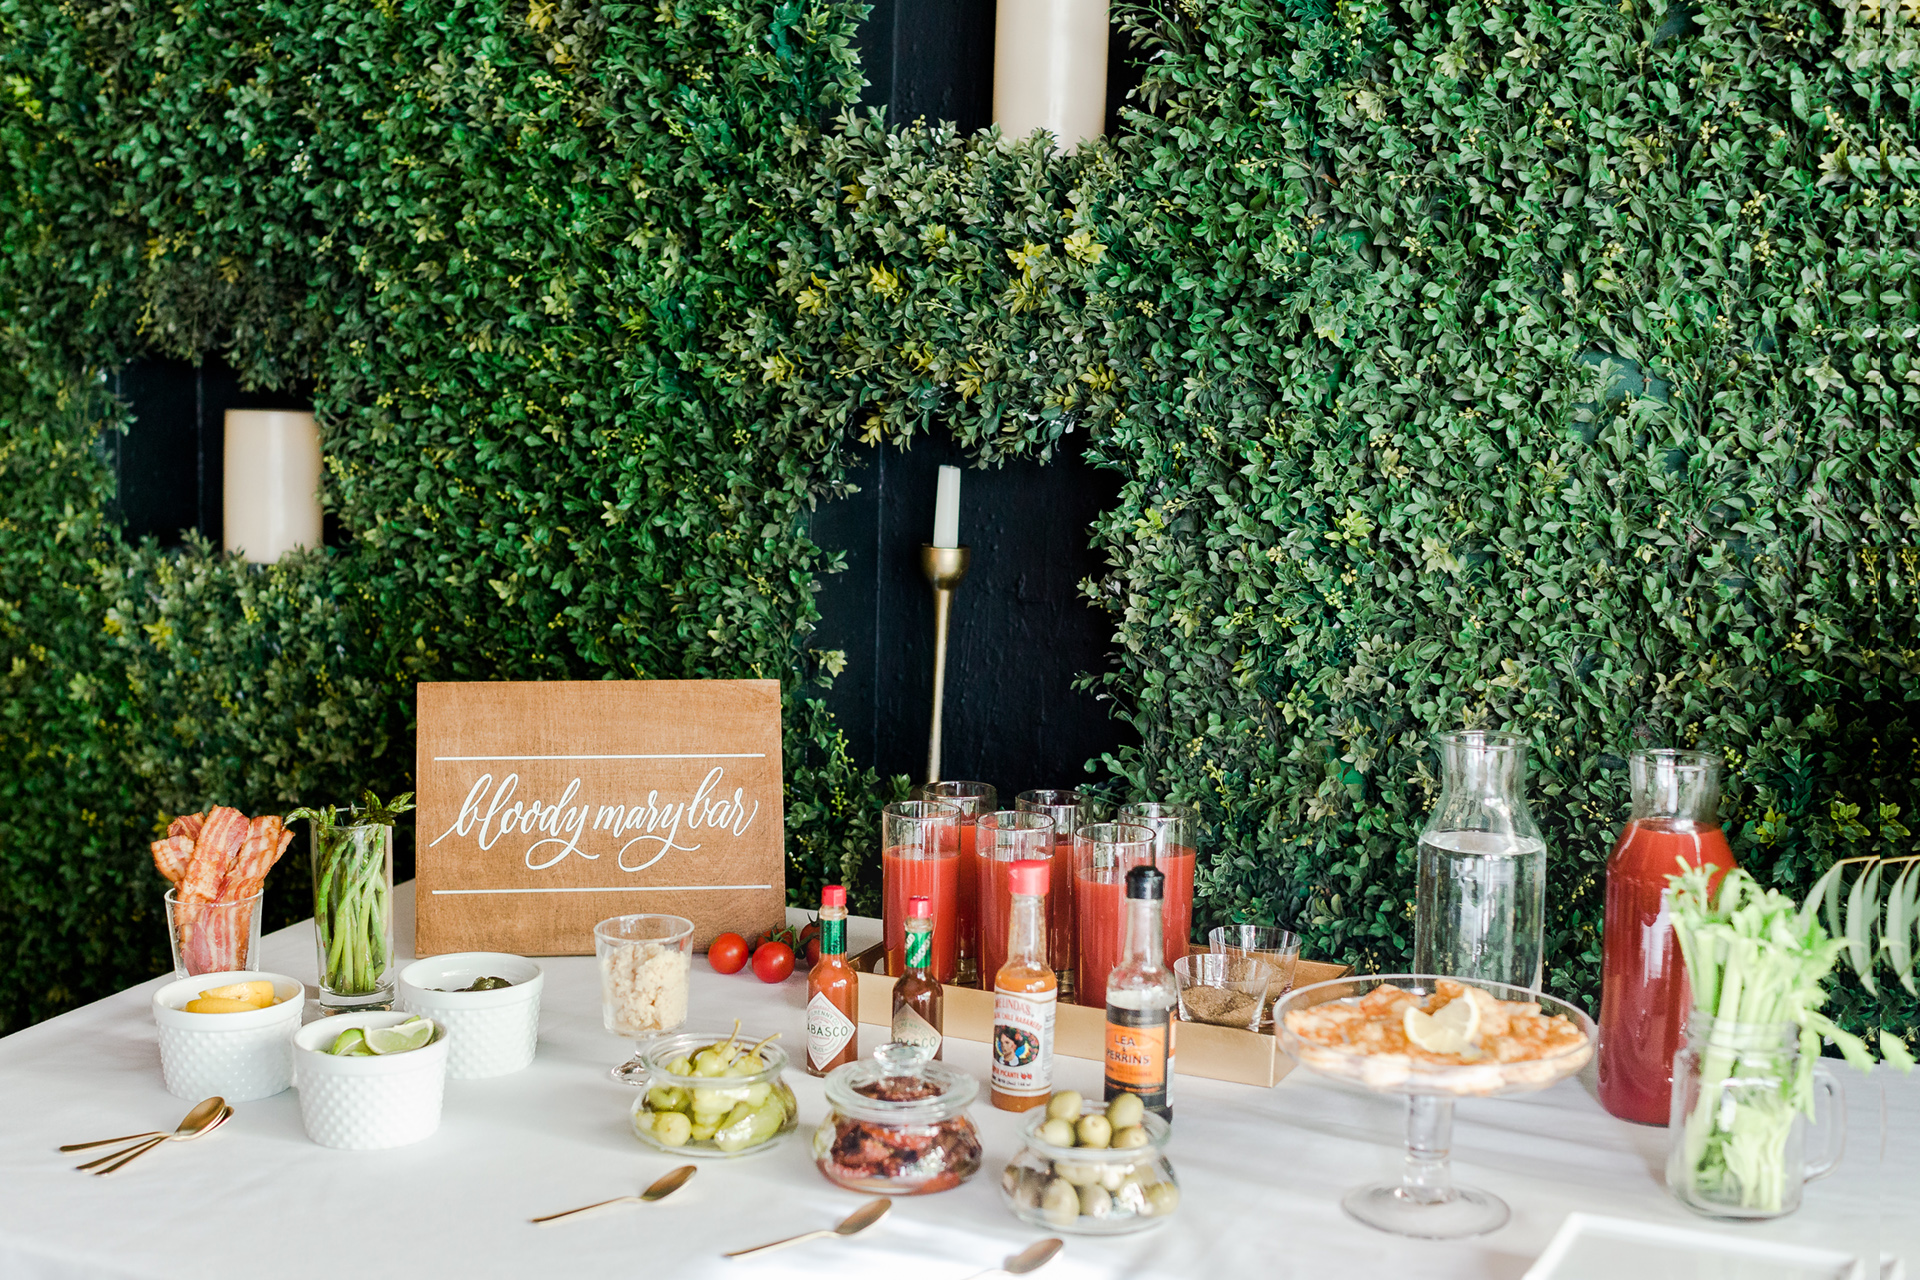 A bloody Mary bar at an event hosted by Ristorante Beatrice.